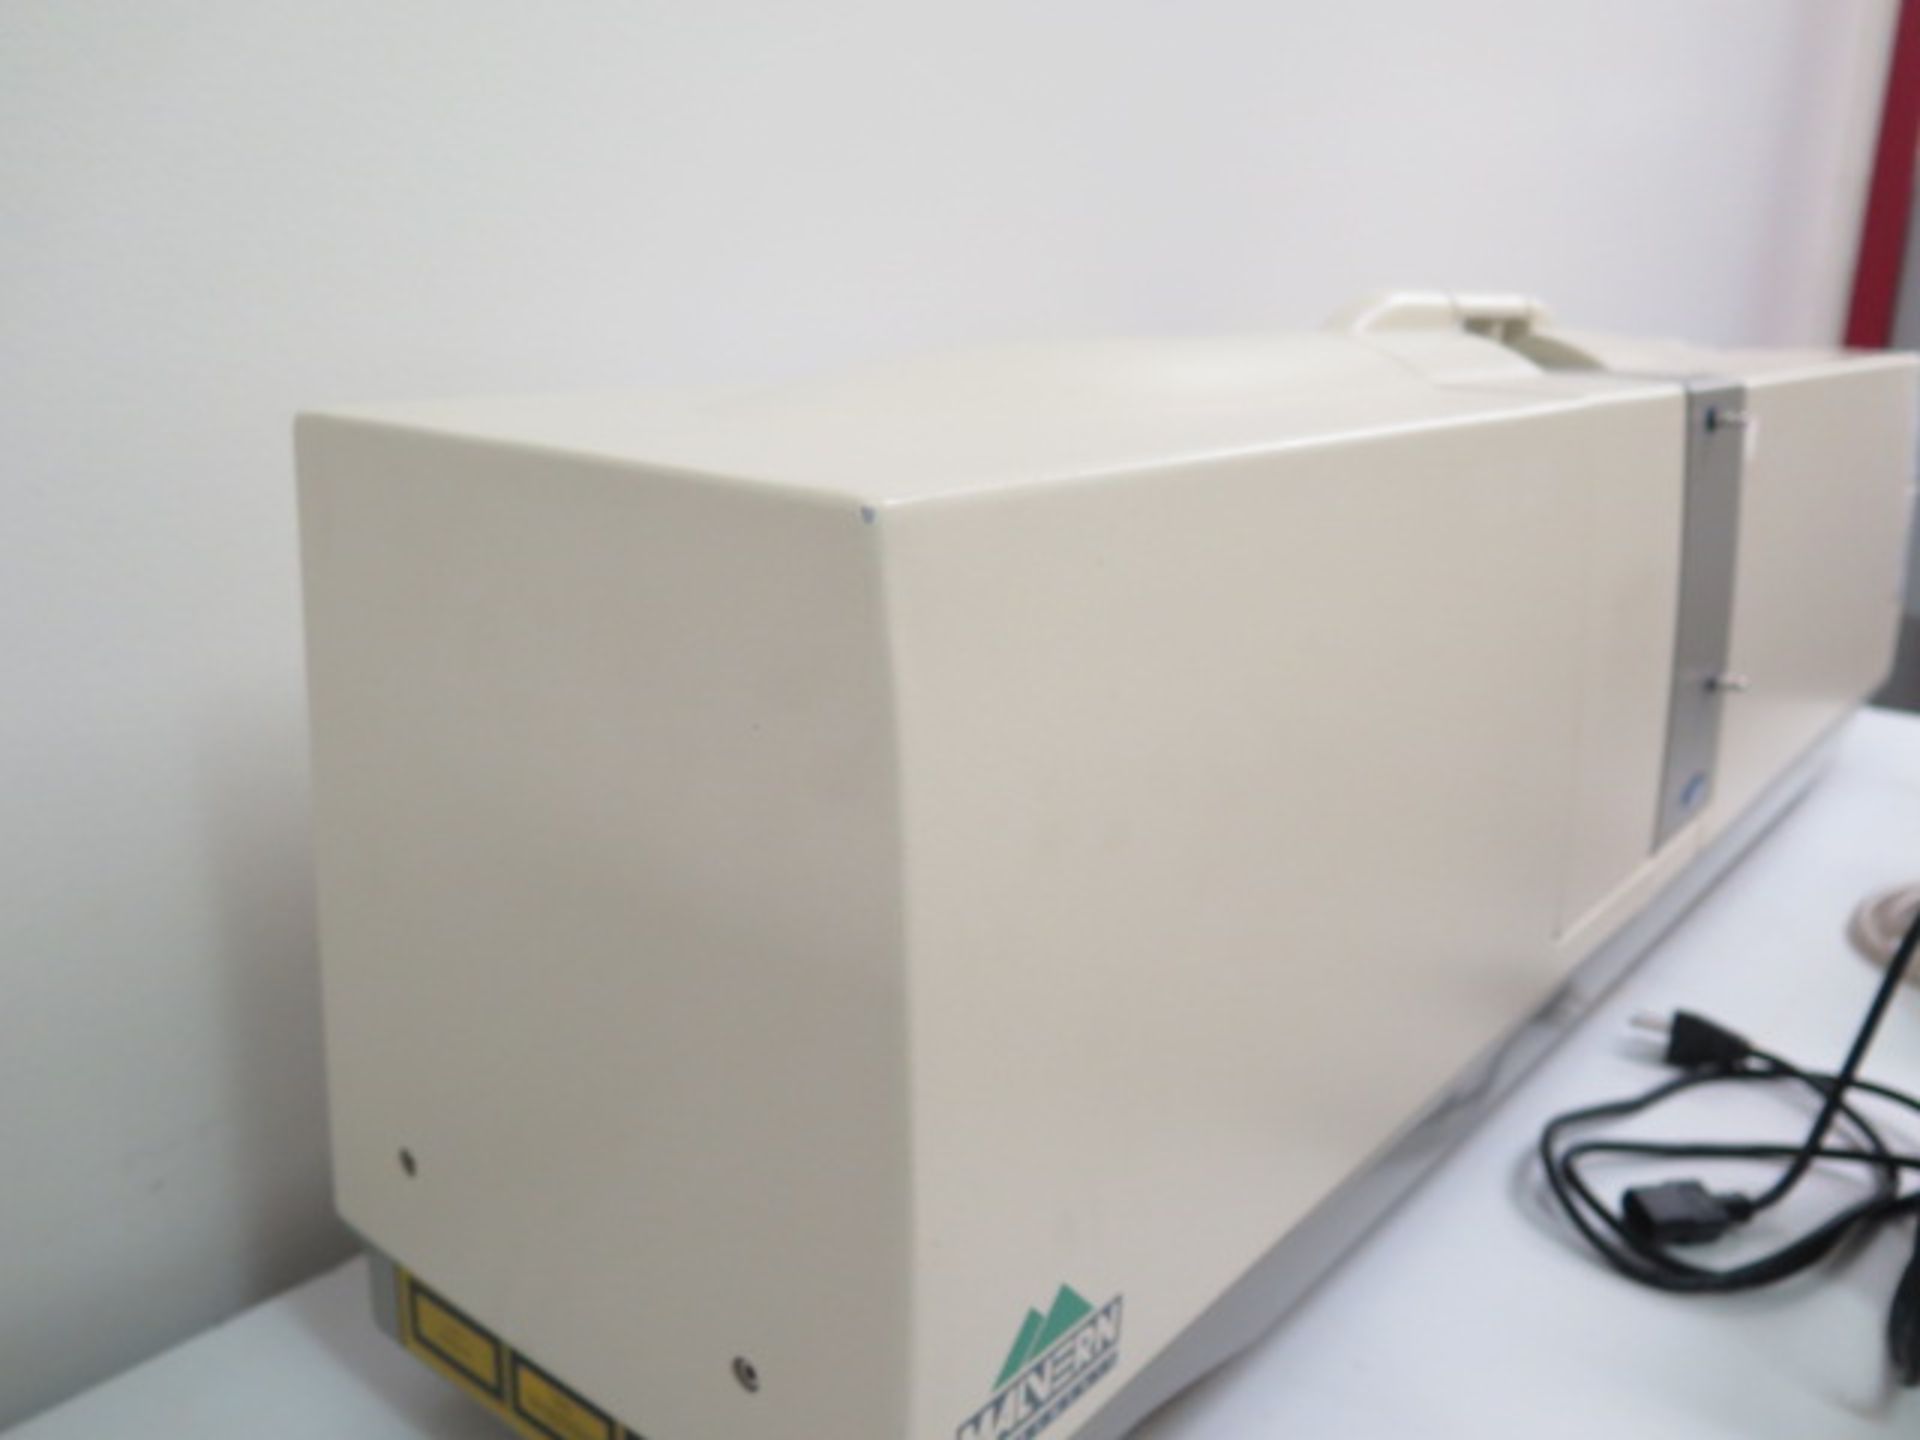 Malvern Instruments Hydro 2000S” Wet Sample Dispersion Unit (SOLD AS-IS - NO WARRANTY) - Image 6 of 21